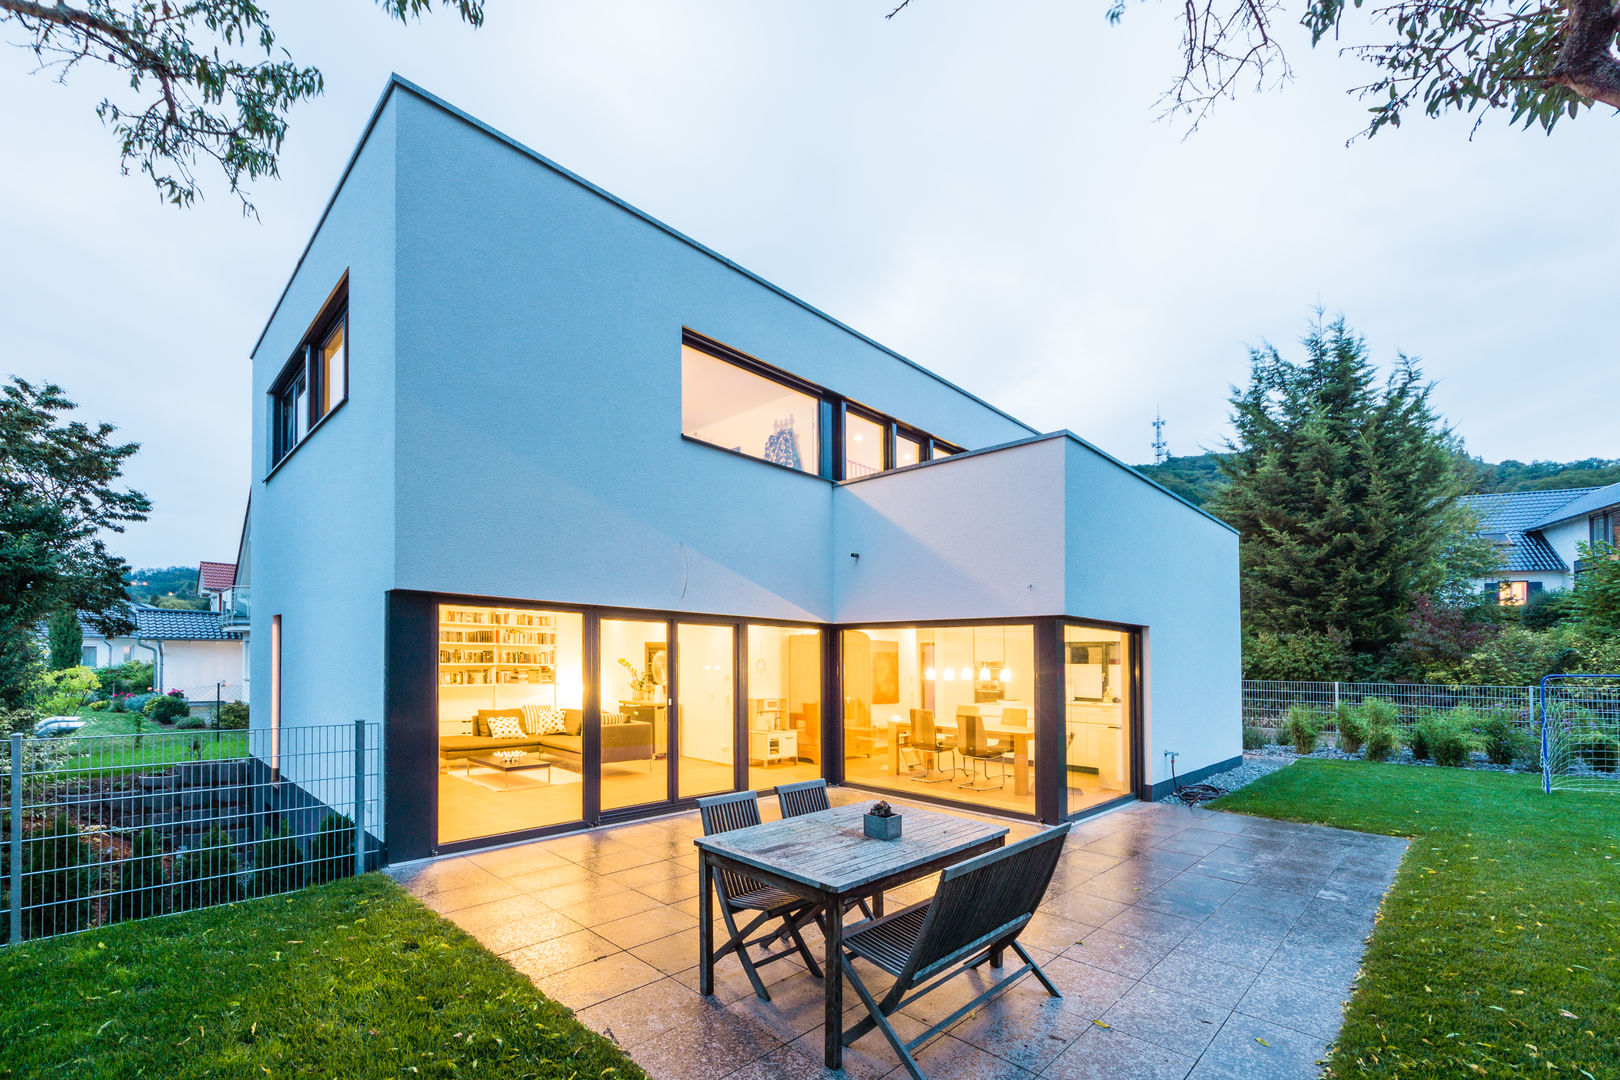 Balance House - Single Family House in Weinheim, Germany, Helwig Haus und Raum Planungs GmbH Helwig Haus und Raum Planungs GmbH Balcone, Veranda & Terrazza in stile moderno